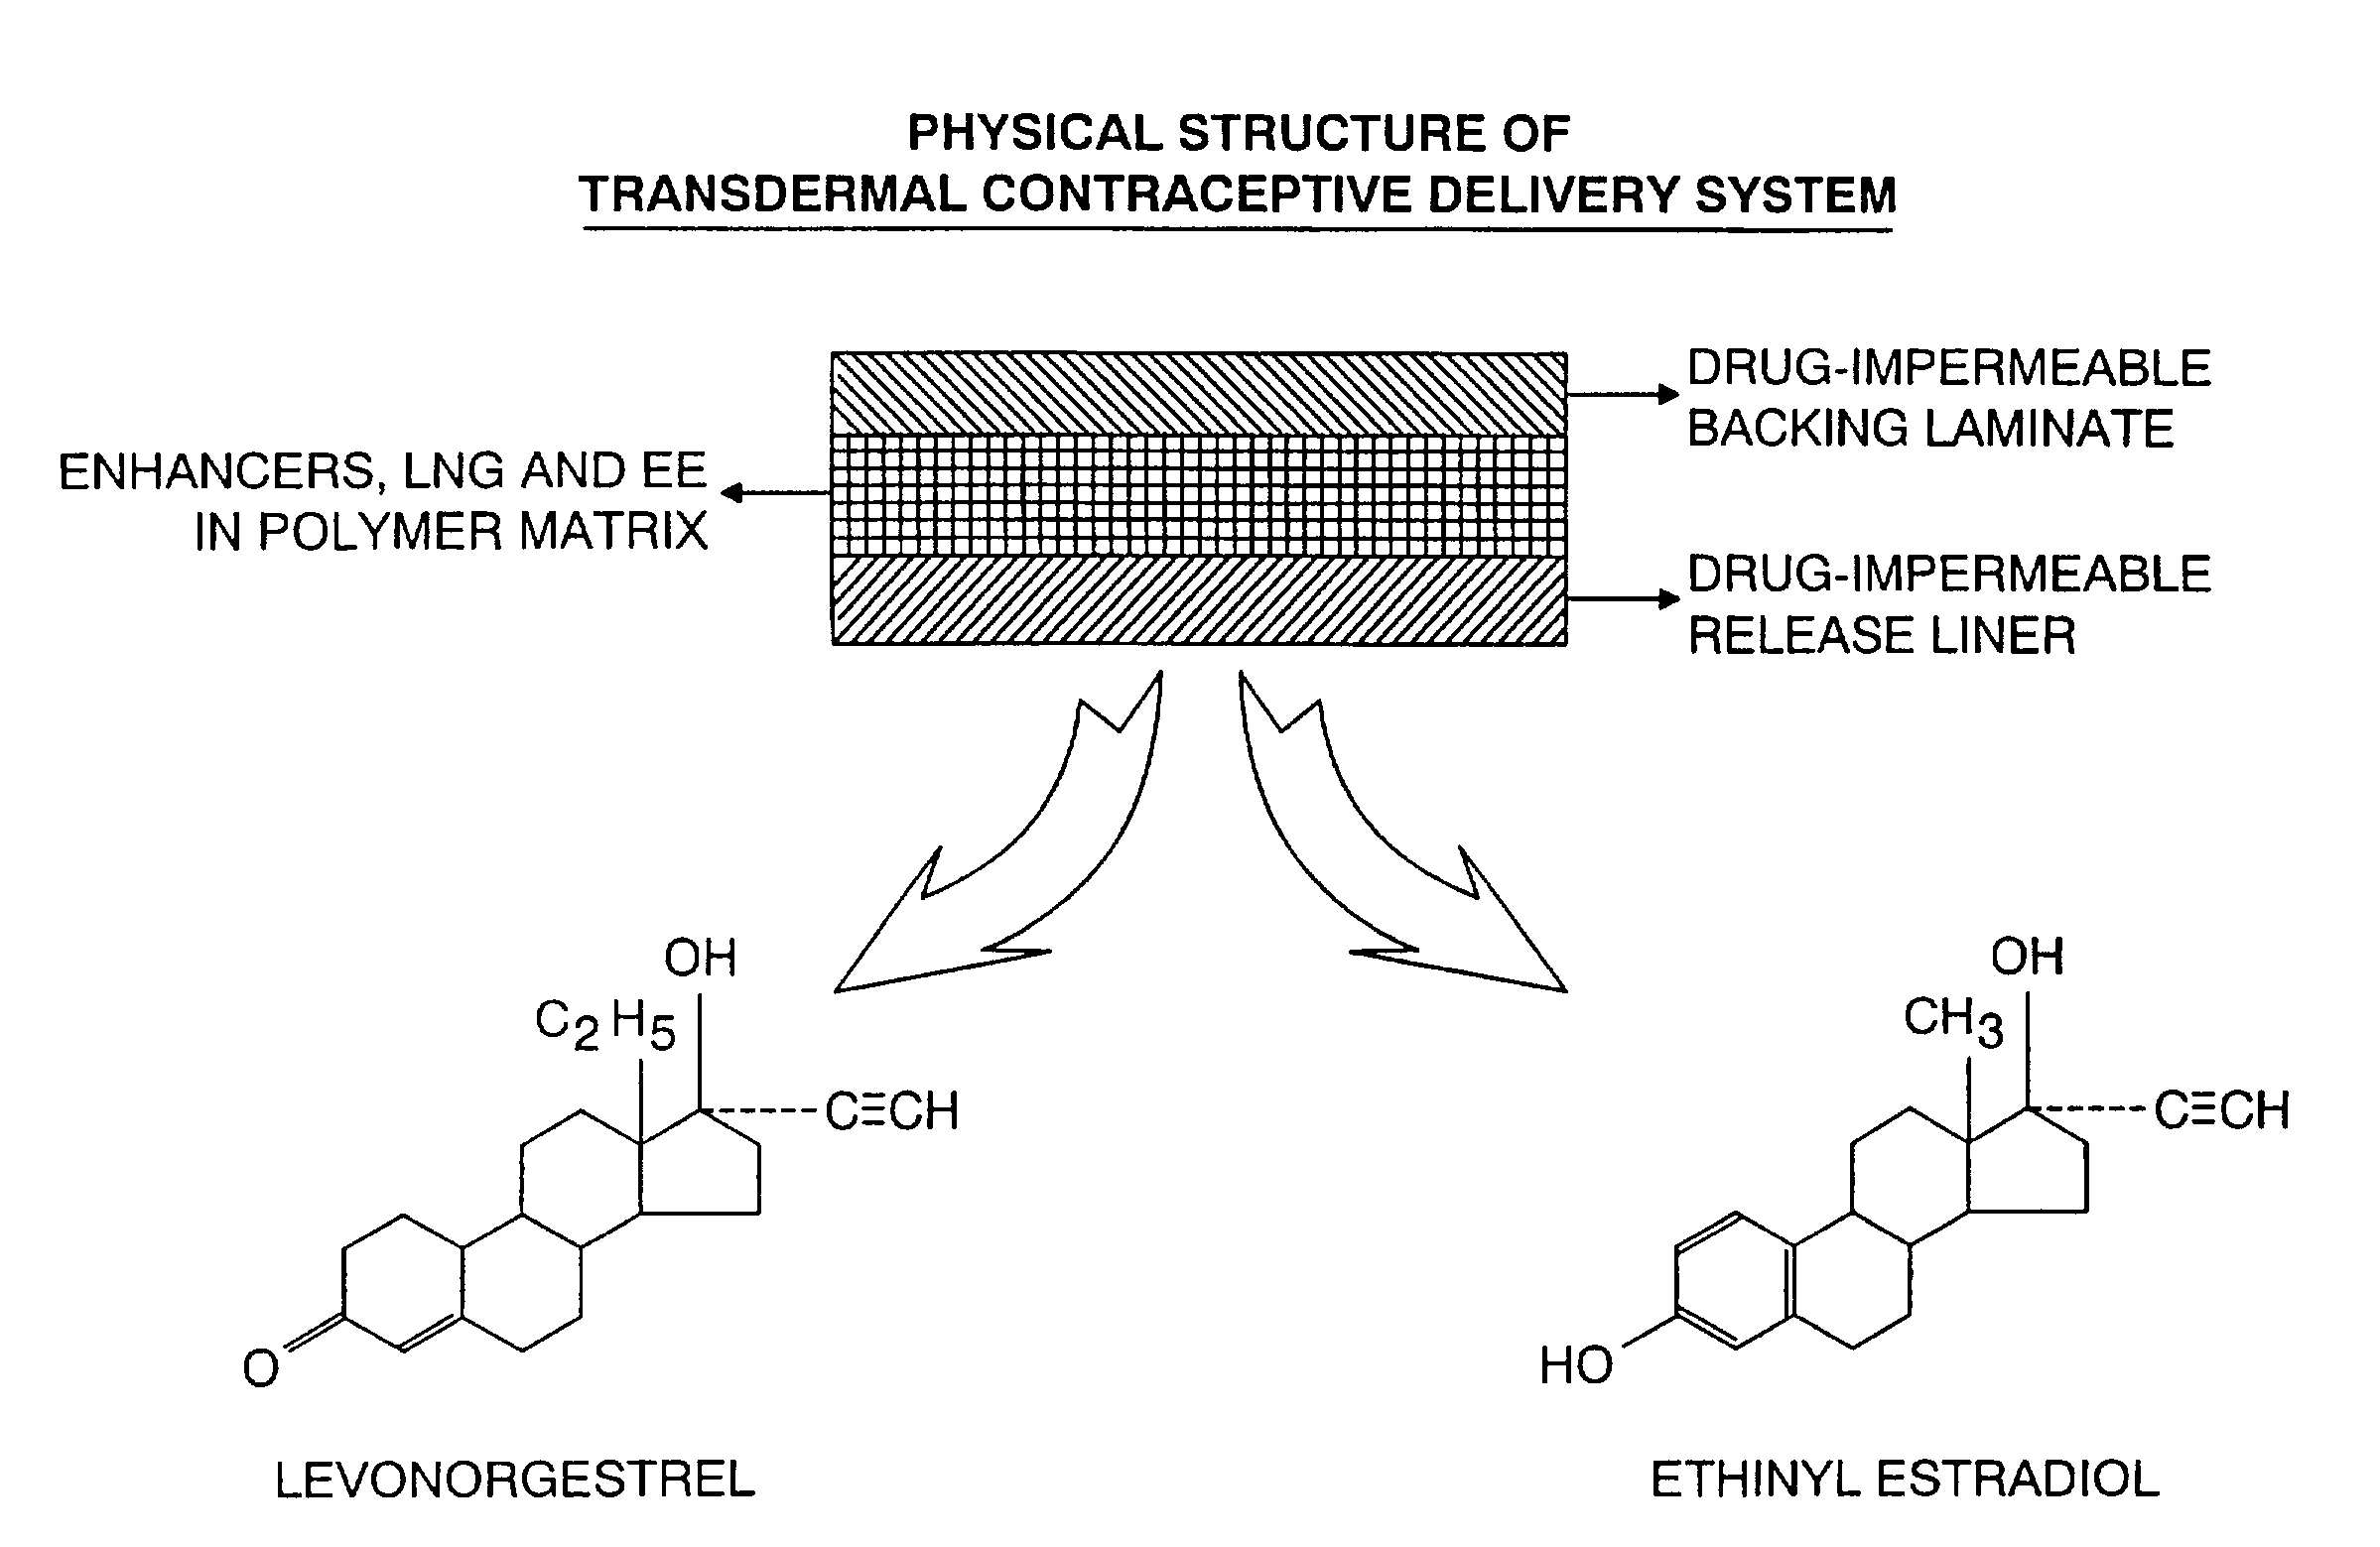 Transdermal contraceptive delivery system and process